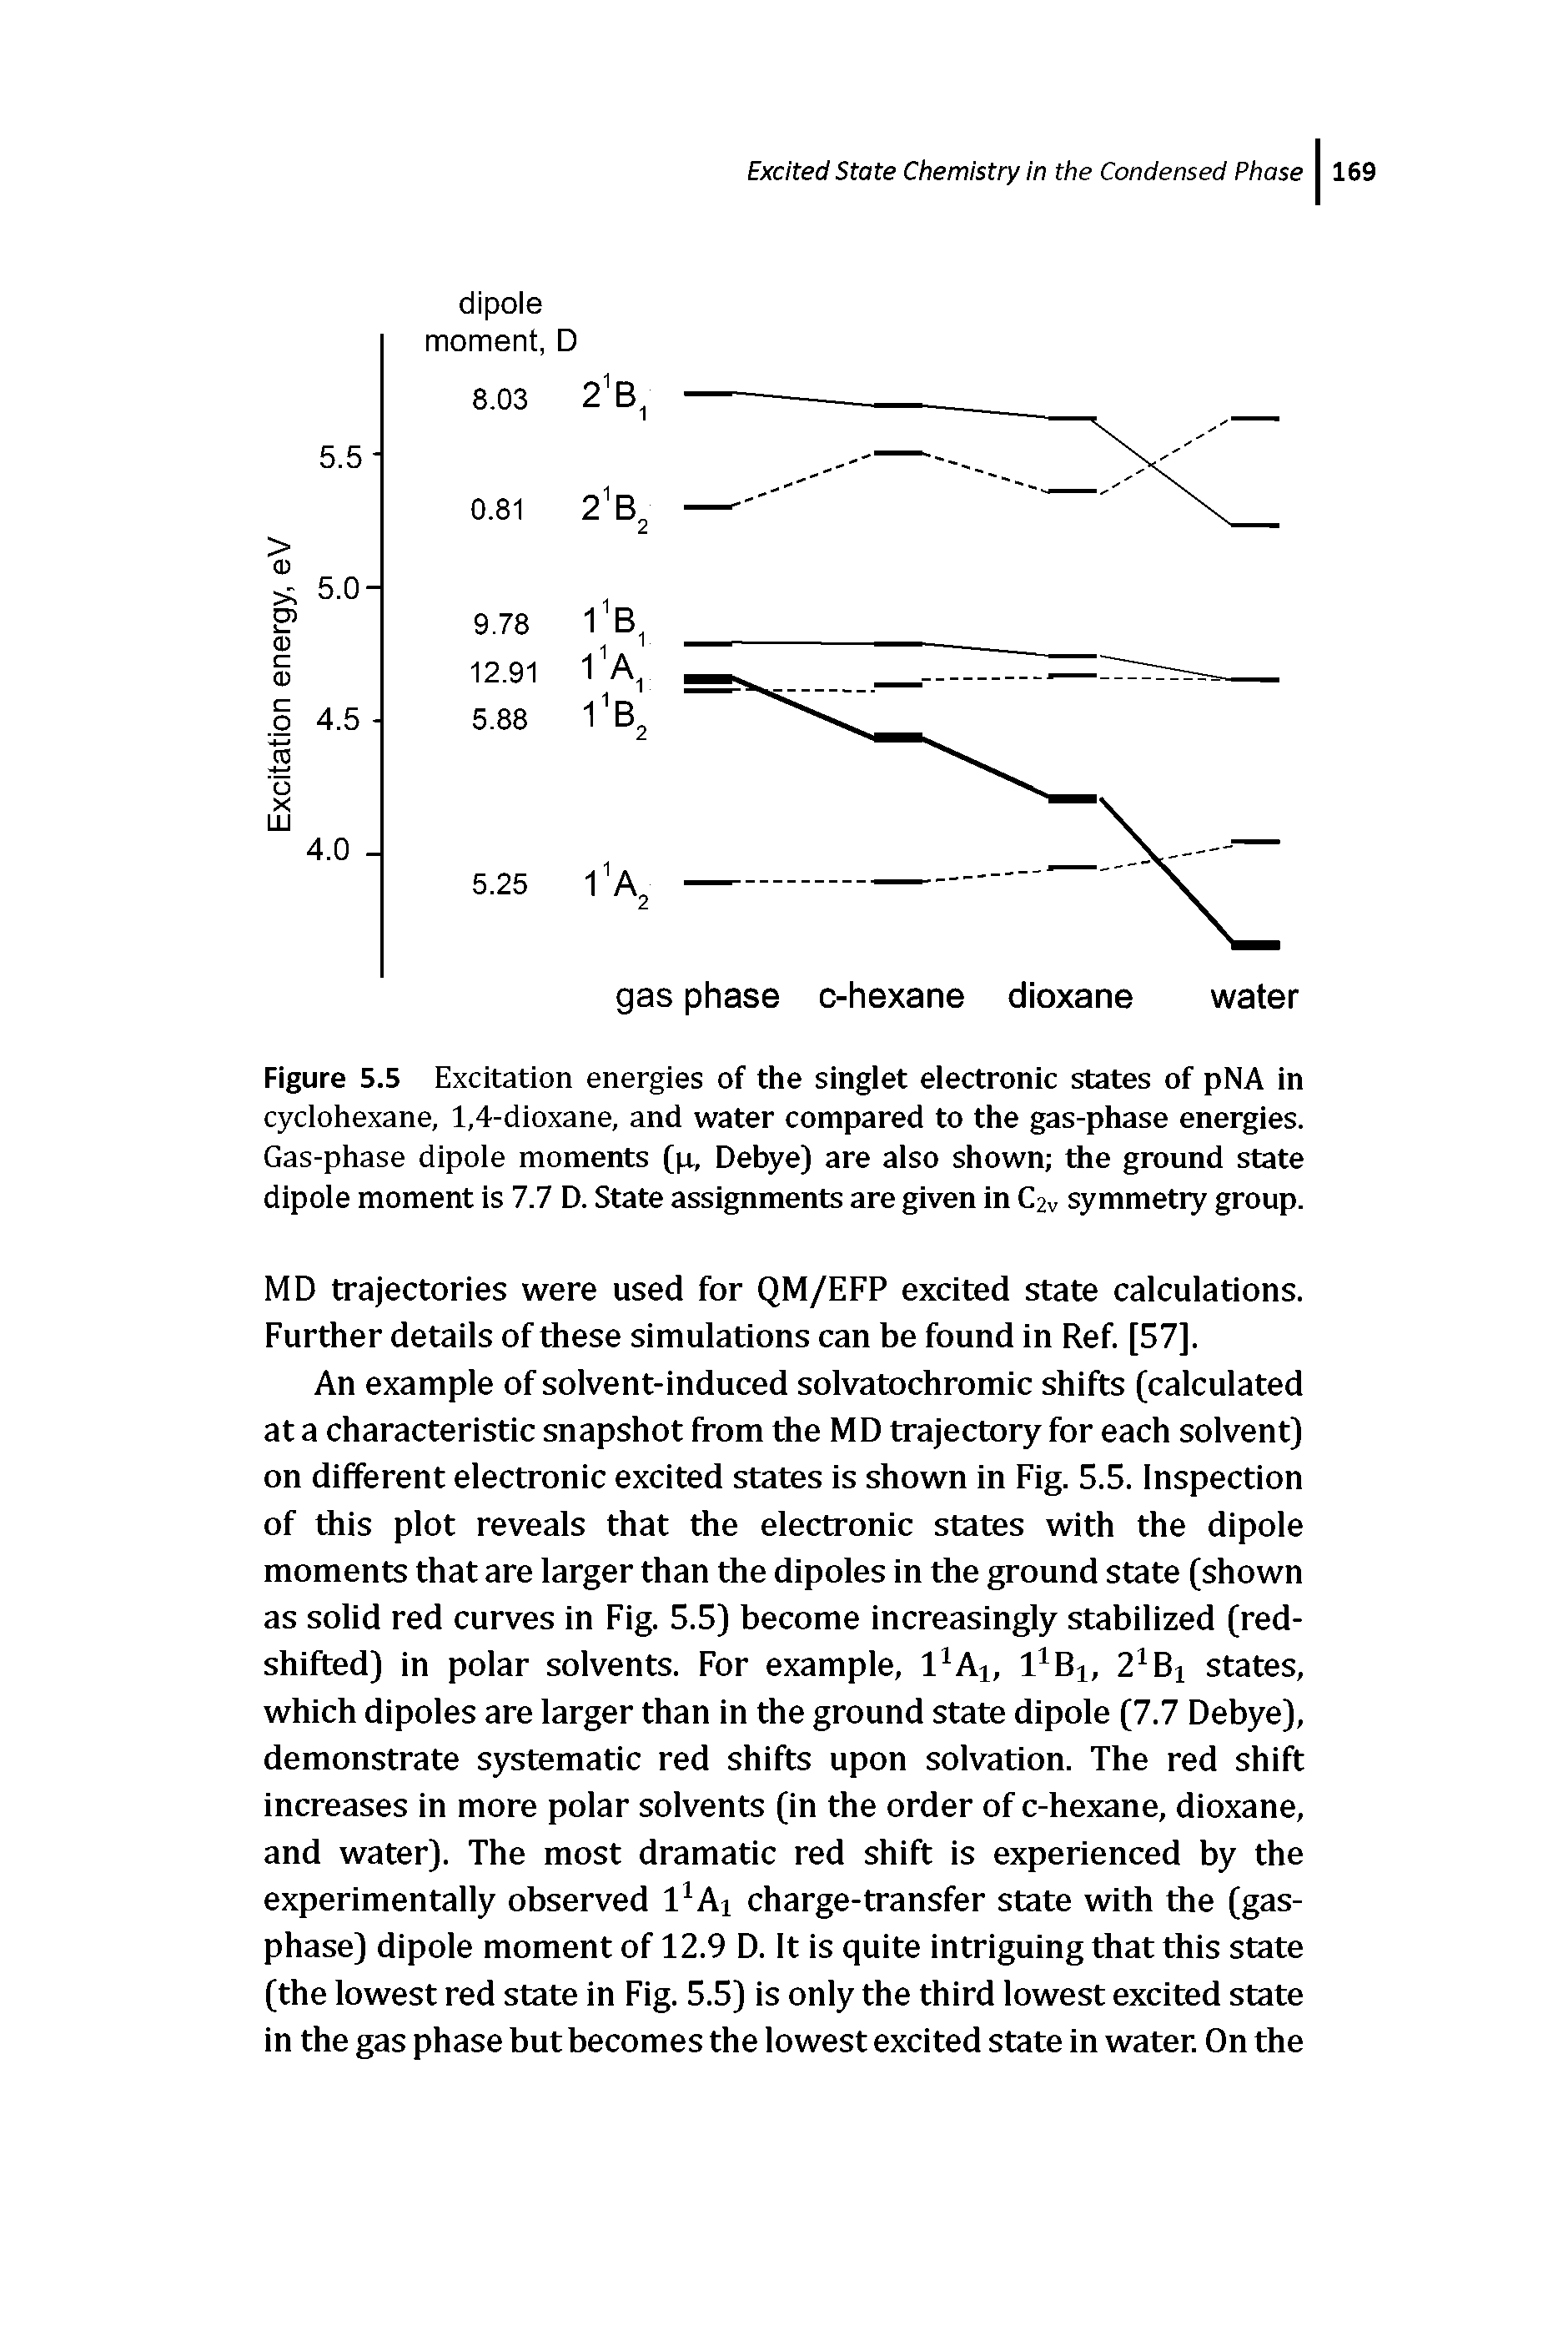 Figure 5.5 Excitation energies of the singlet electronic states of pNA in cyclohexane, 1,4-dioxane, and water compared to the gas-phase energies. Gas-phase dipole moments (p, Debye) are also shown the ground state dipole moment is 7.7 D. State assignments are given in C2v symmetry group.